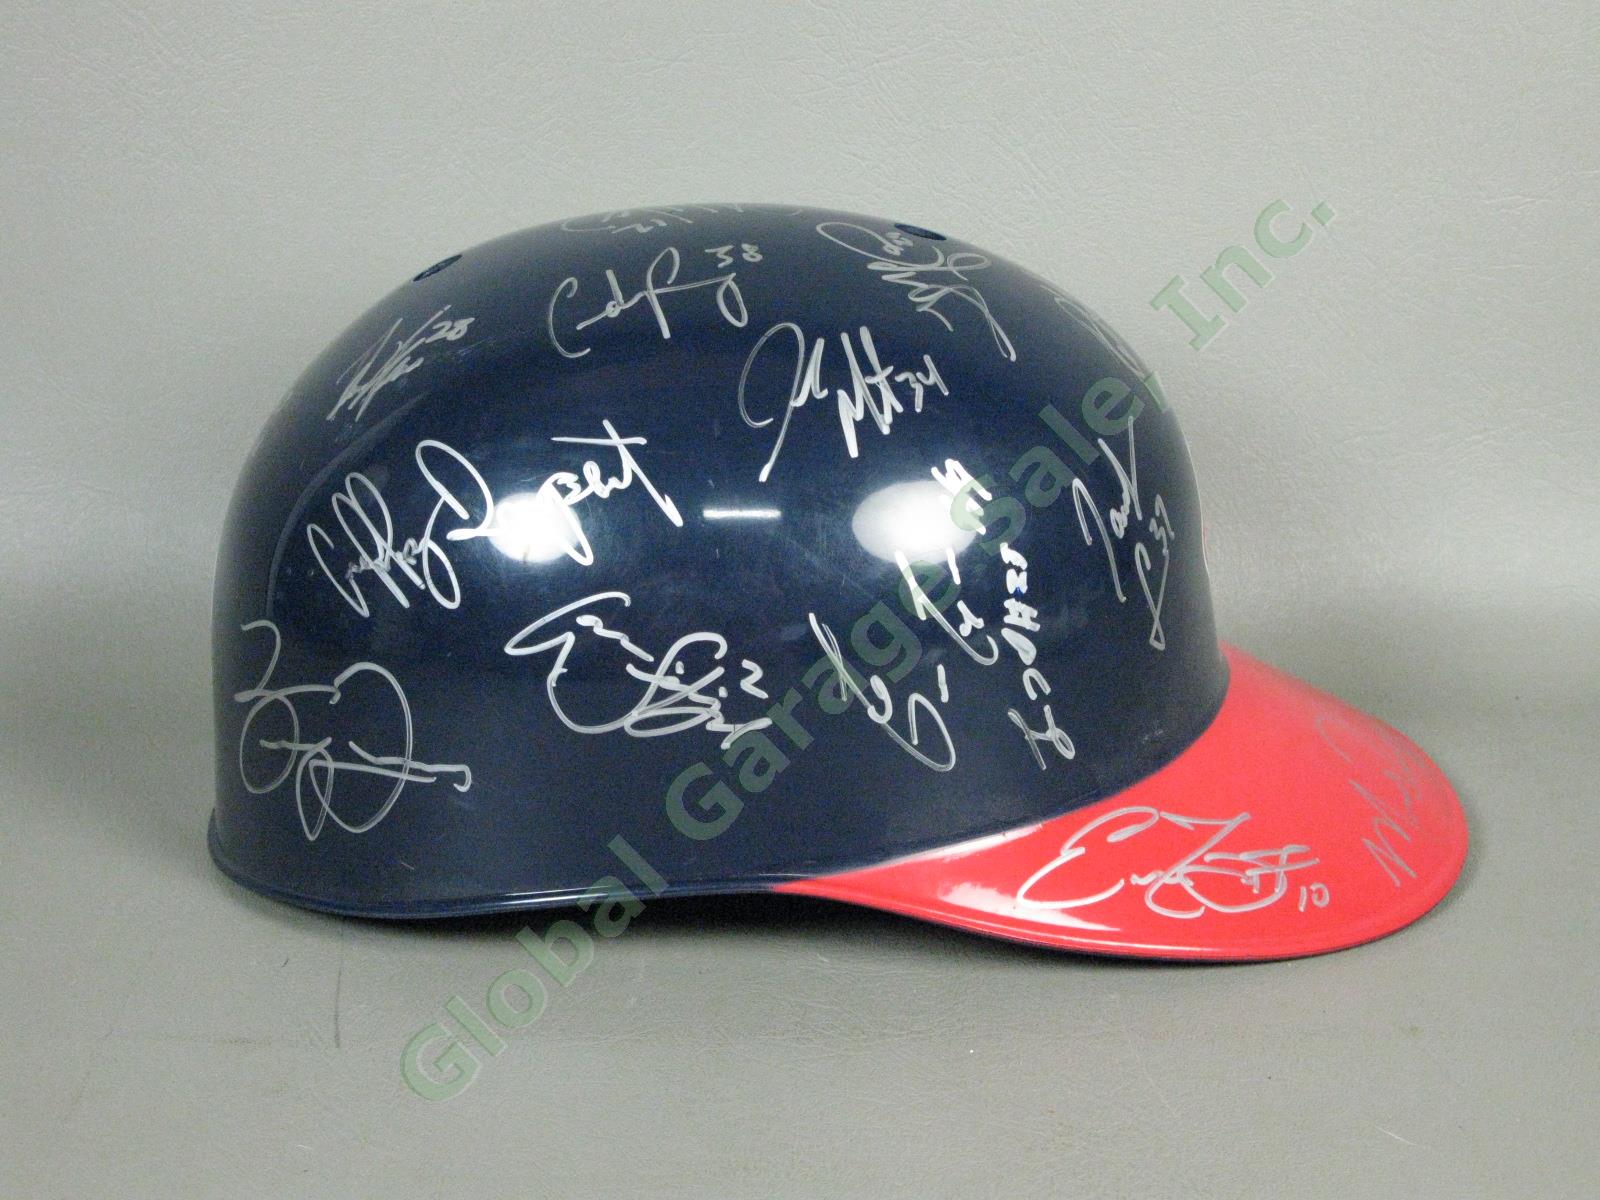 2012 Mahoning Valley Scrappers Team Signed Baseball Helmet Cleveland Indians NR 1